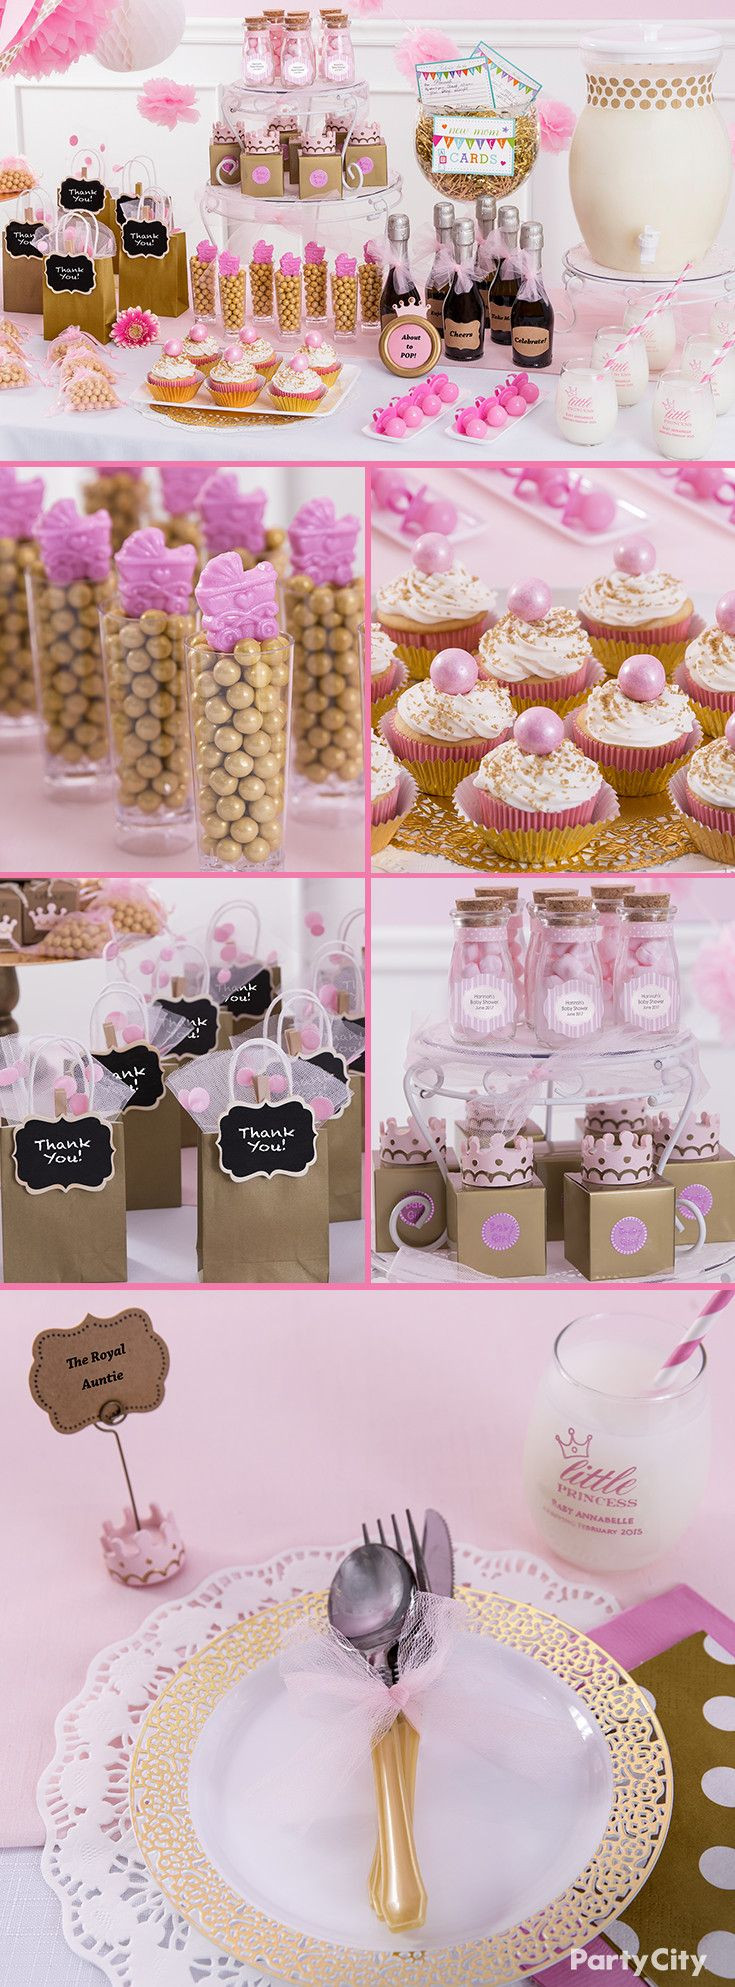 Party City.Com Baby Shower
 101 best Baby Shower Ideas images on Pinterest